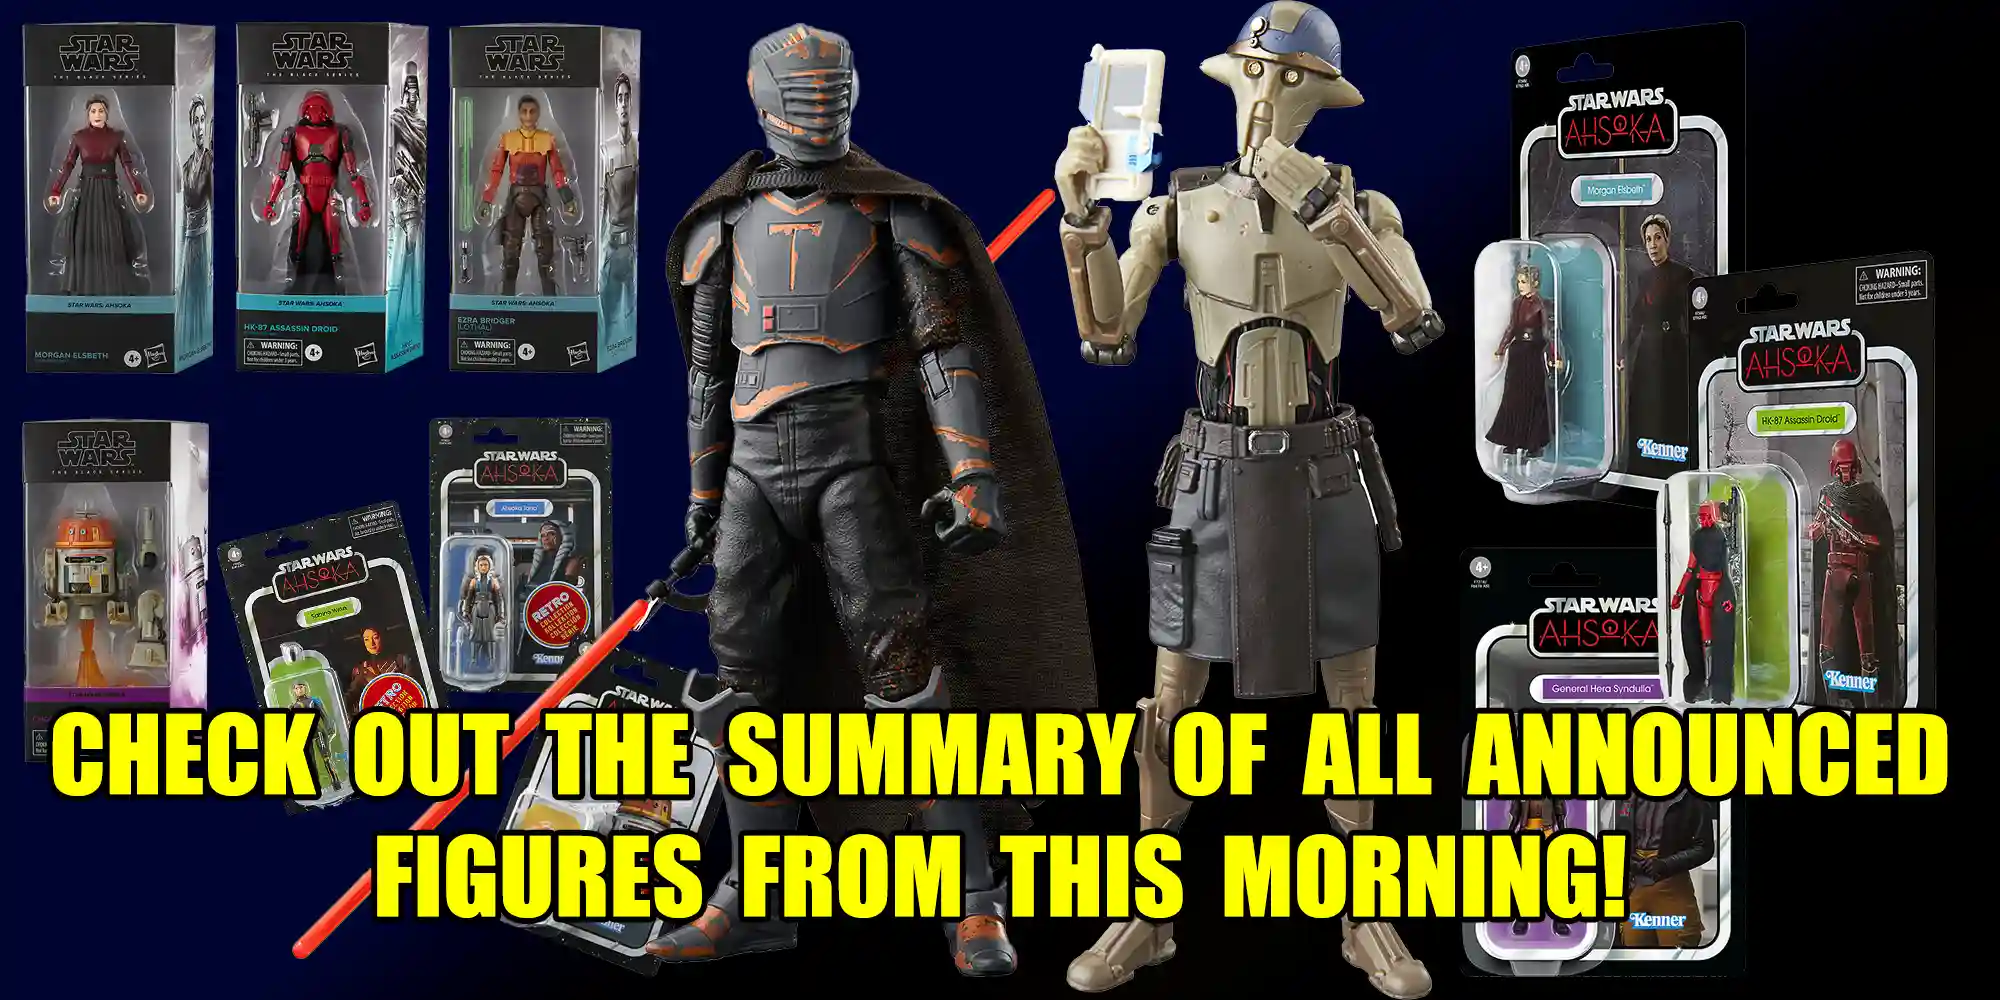 Catch Up With This Morning's Star Wars Action Figure Announcements!